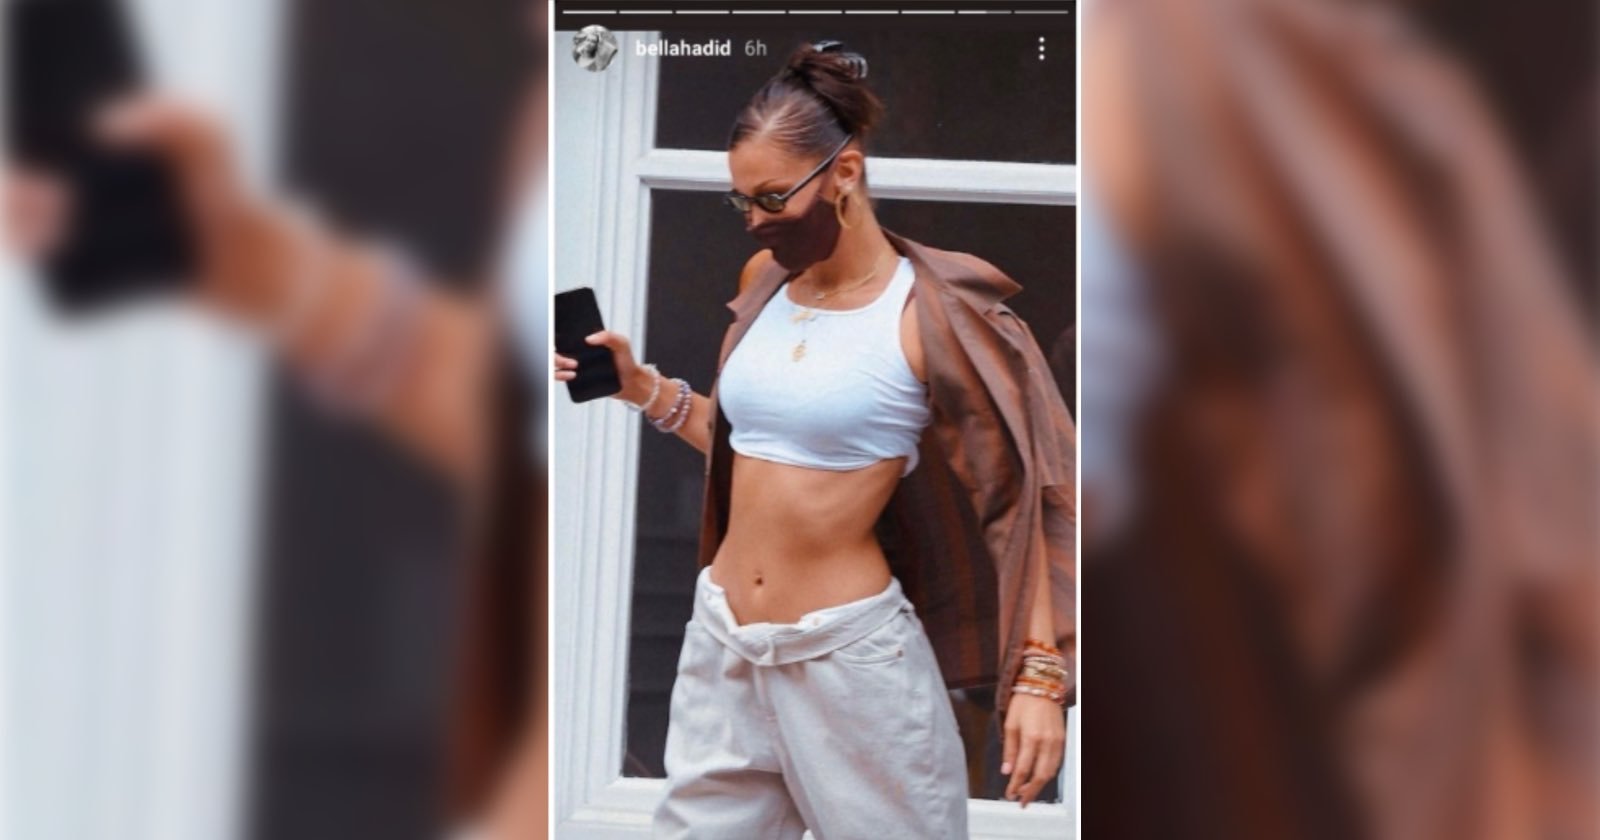 Photographer Screenshots His Photo on Bella Hadids Instagram Story and Sues Her